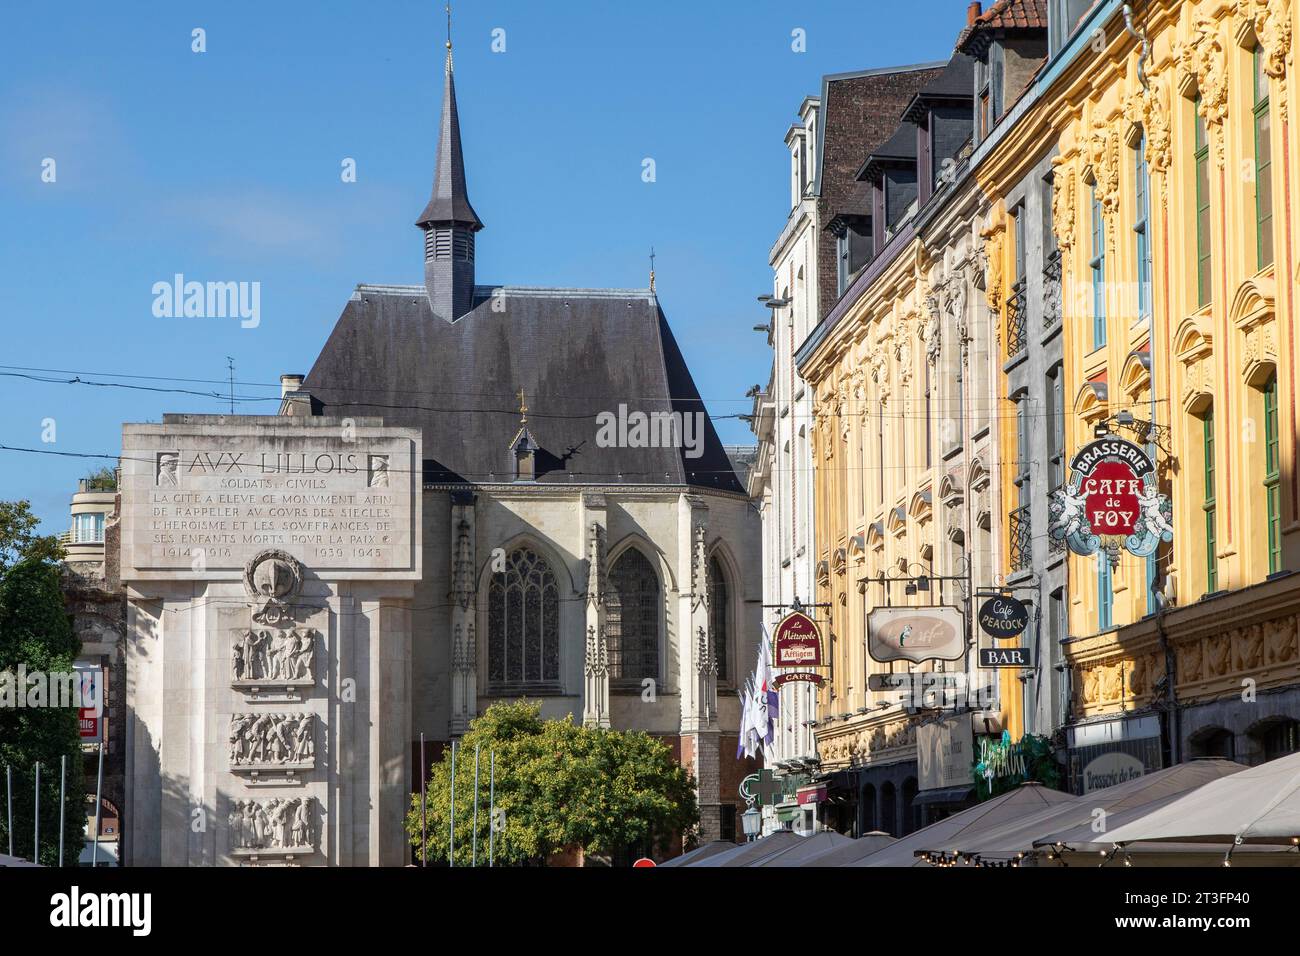 France, Nord, Lille, rue Rihour and its terraces (Palais Rihour in the background) Stock Photo